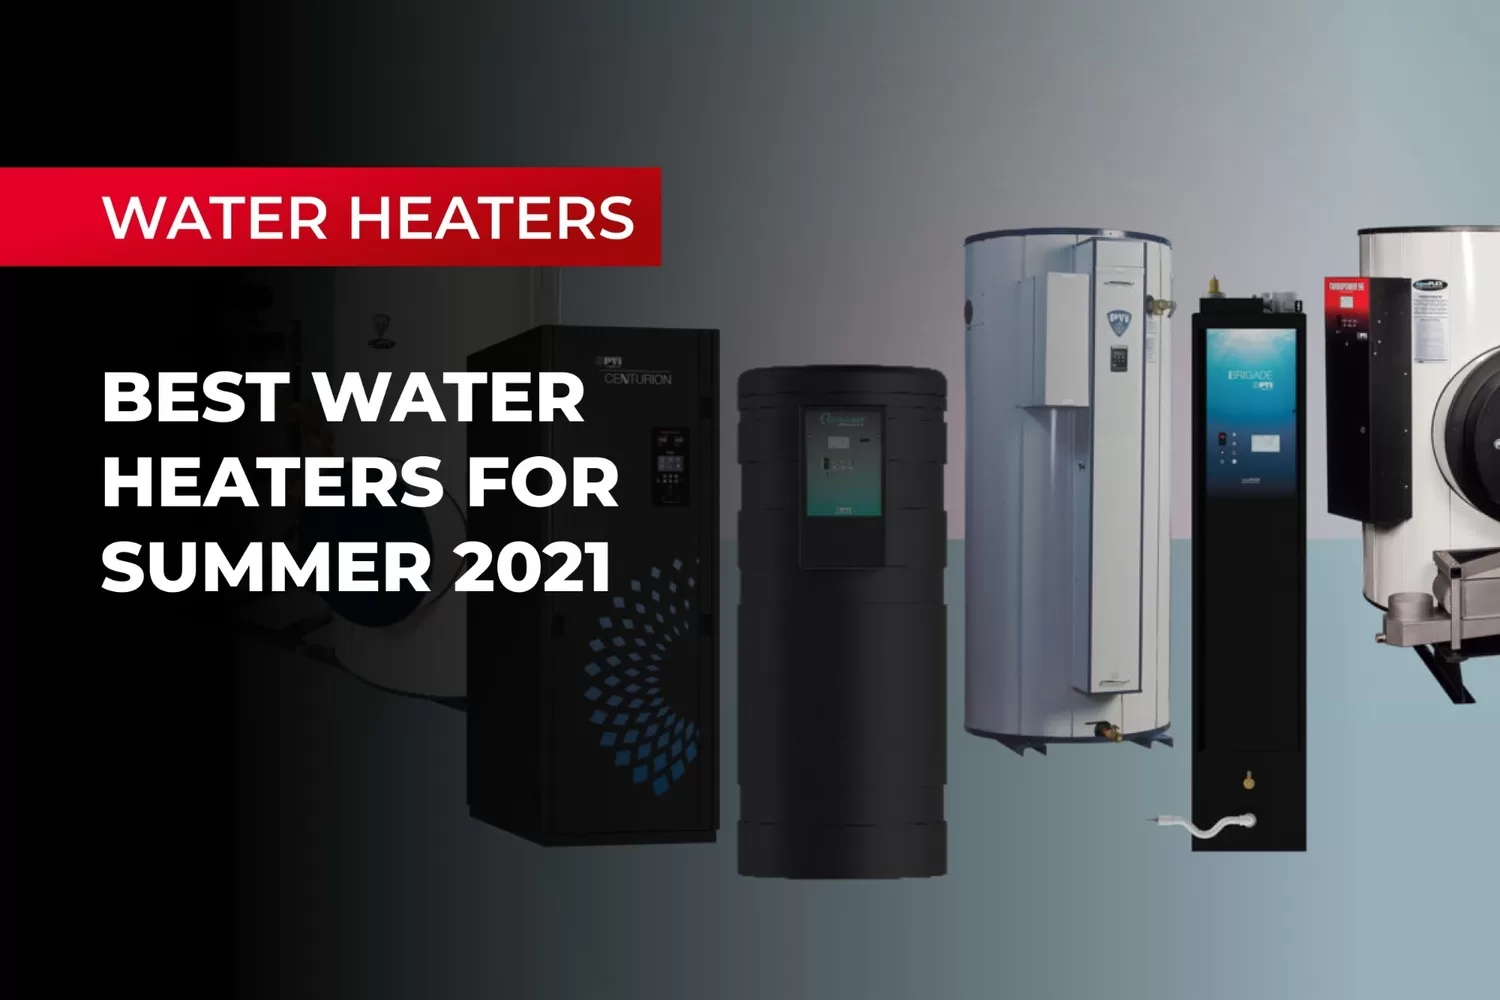 Best Water Heaters for Summer 2021